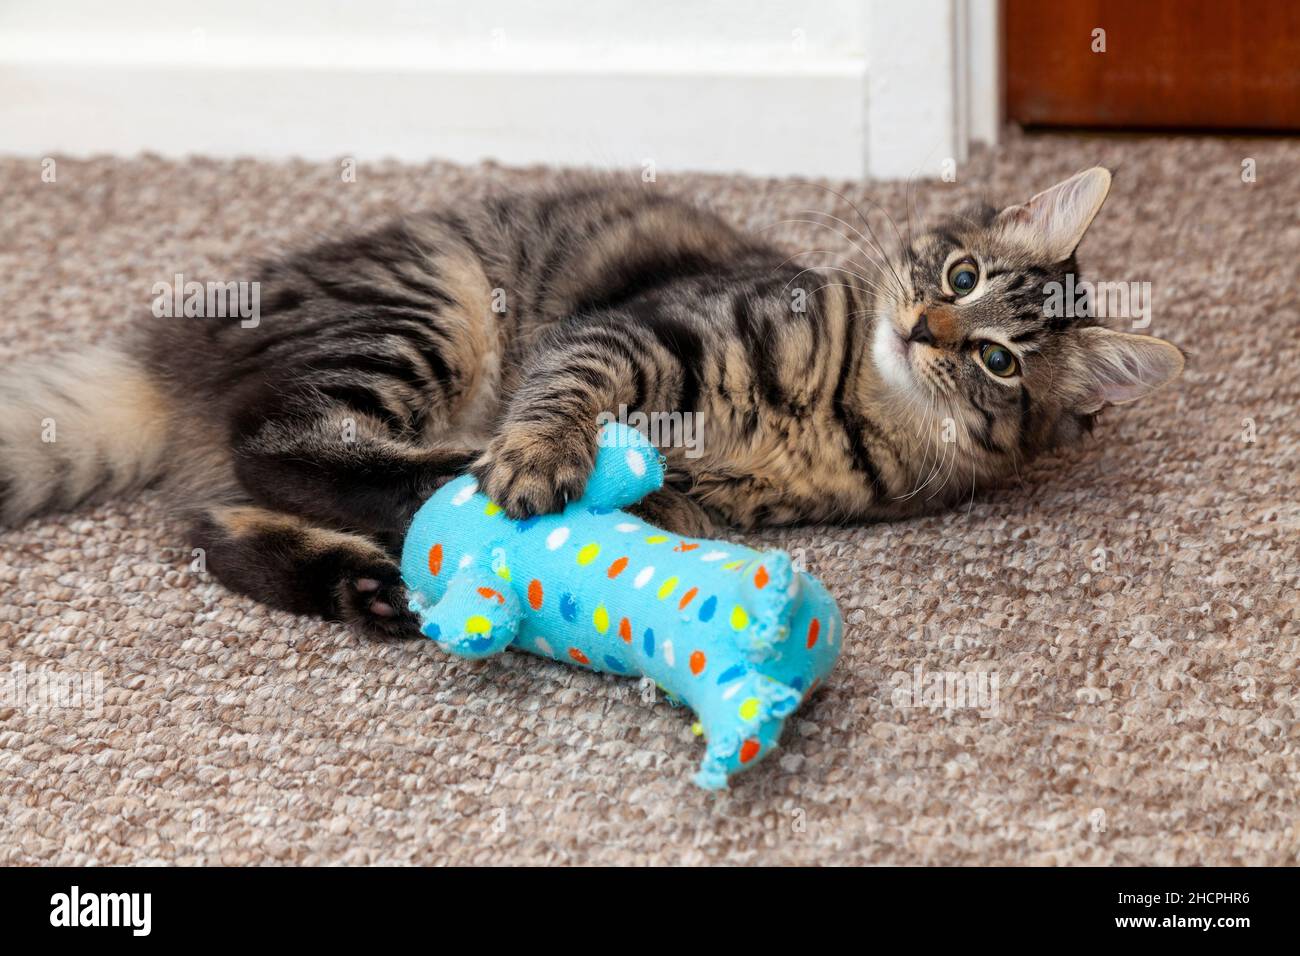 A cute young cat lies on her side on a carpet floor and playfully grabs, kicks and claws at a homemade cat toy Stock Photo